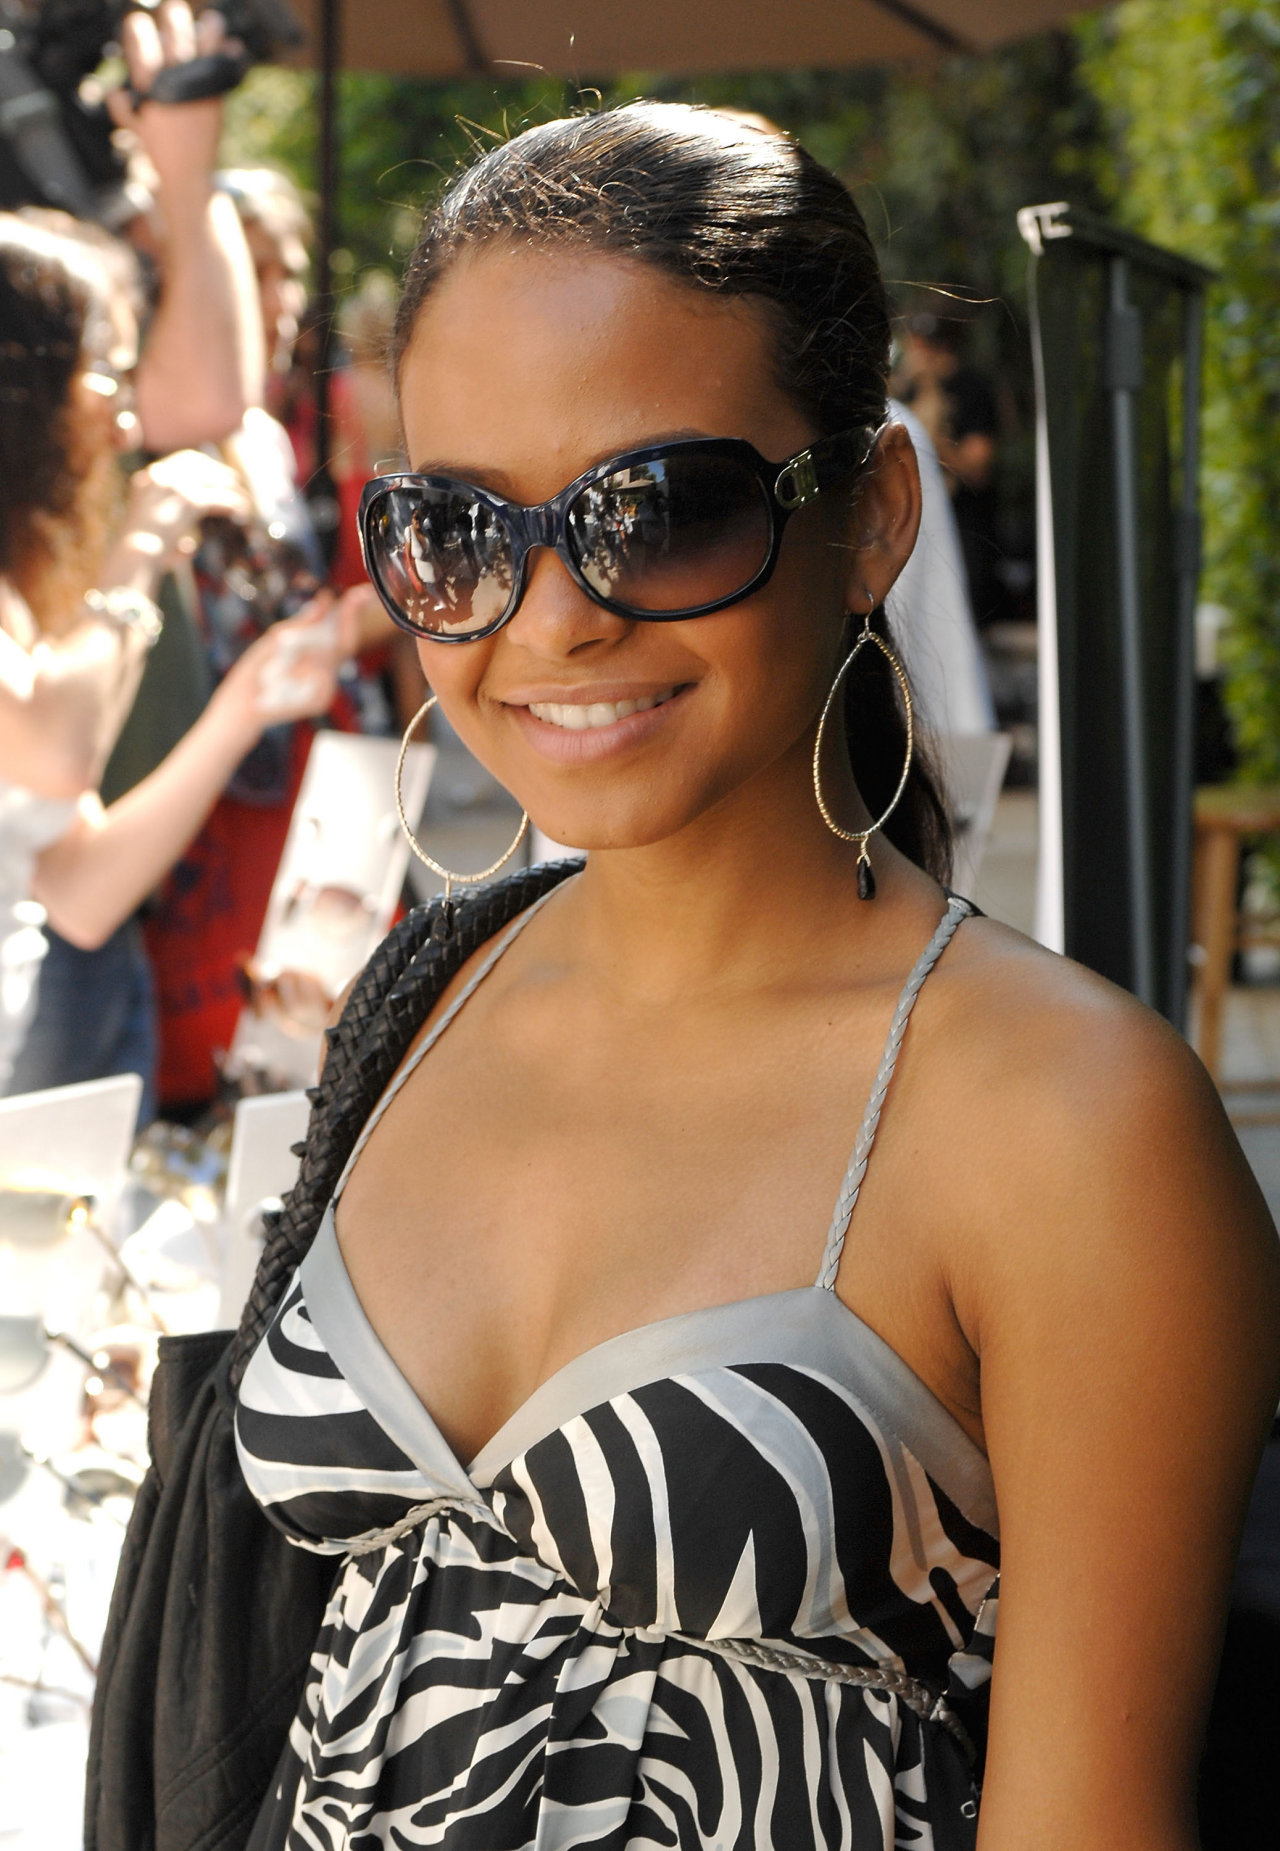 Christina Milian leaked wallpapers